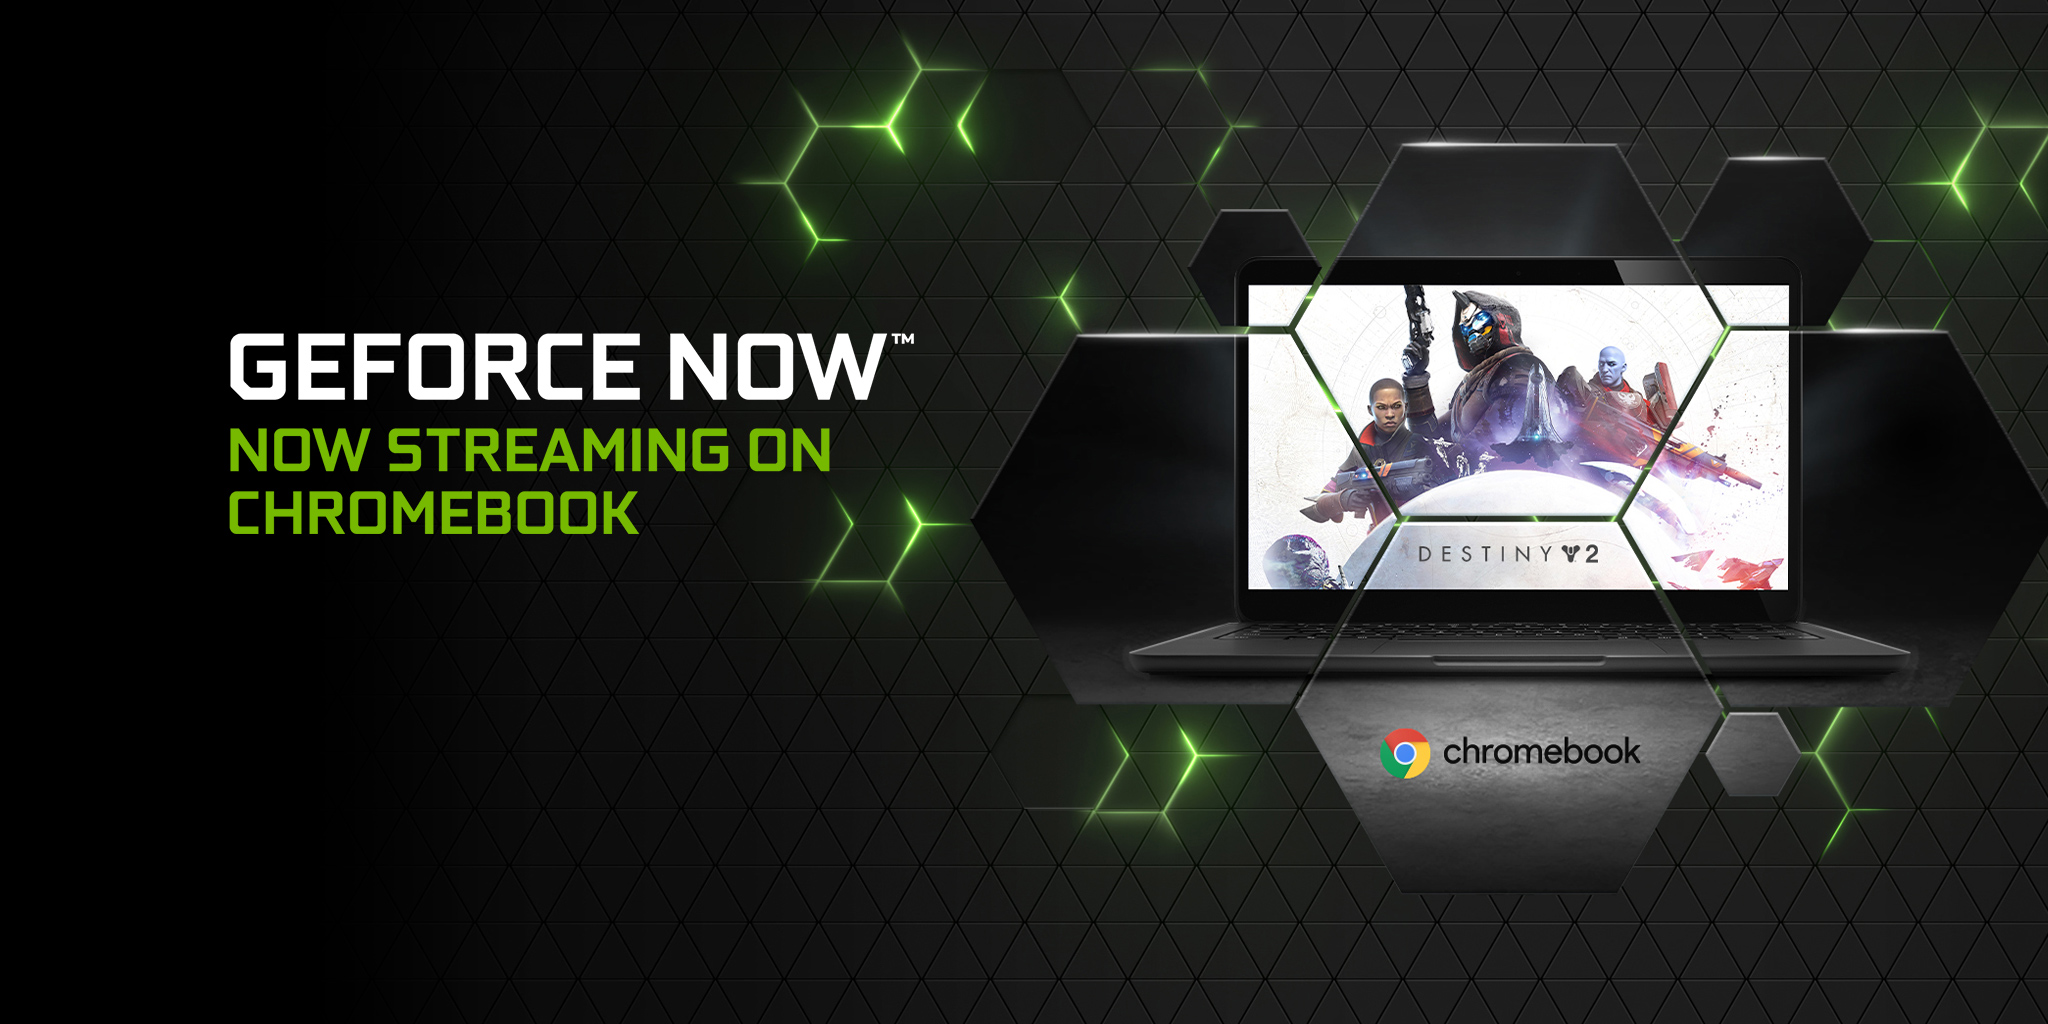 GeForce Now comes to ChromeOS in beta